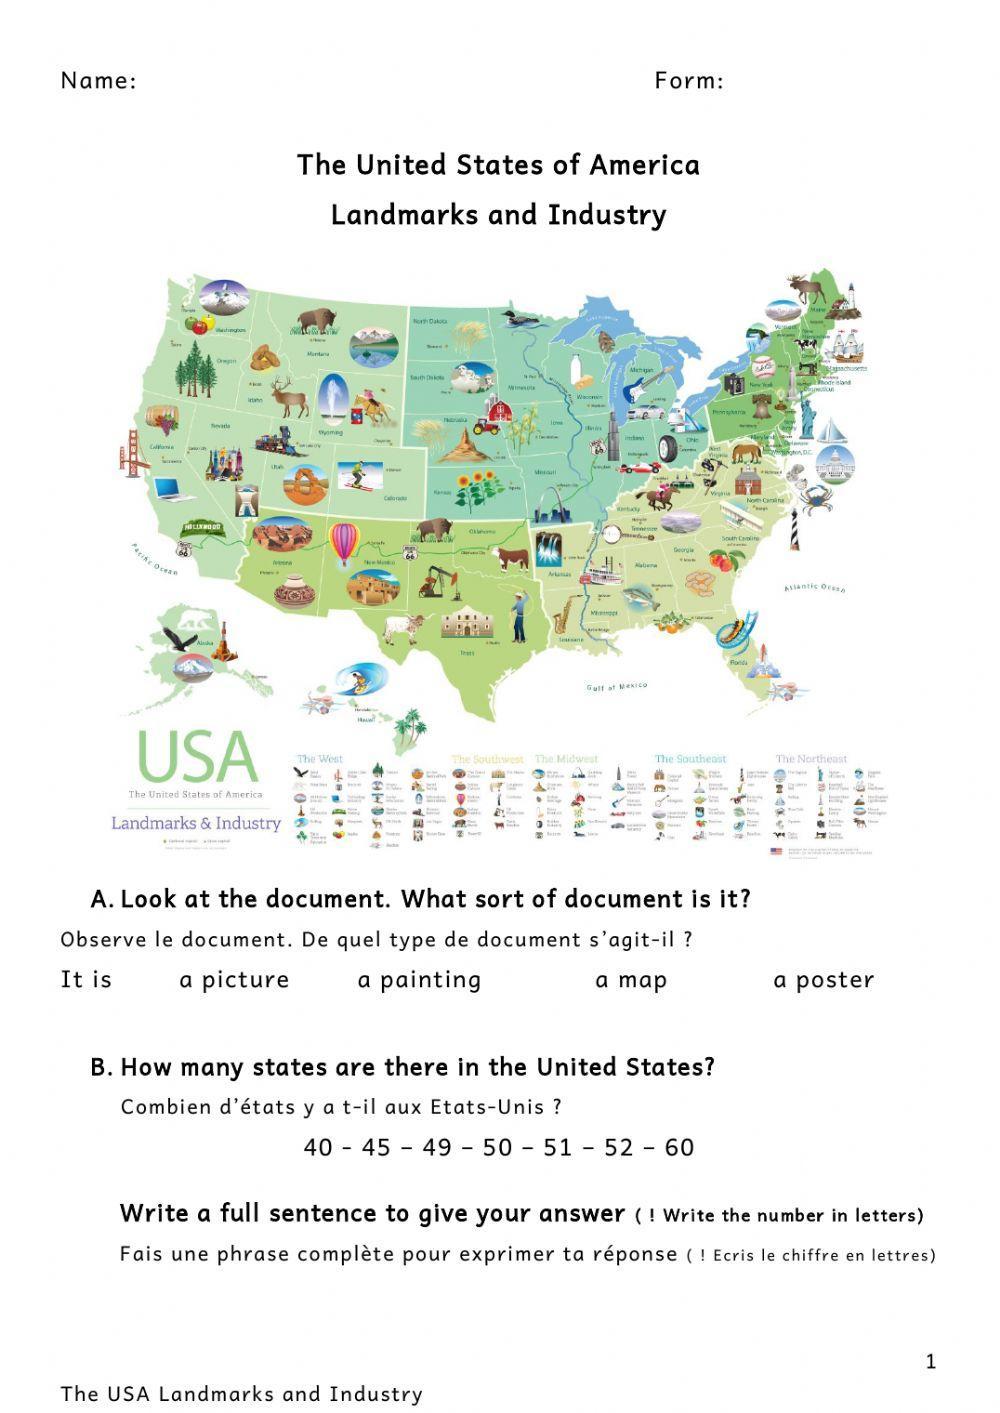 USA Landmarks and Industry